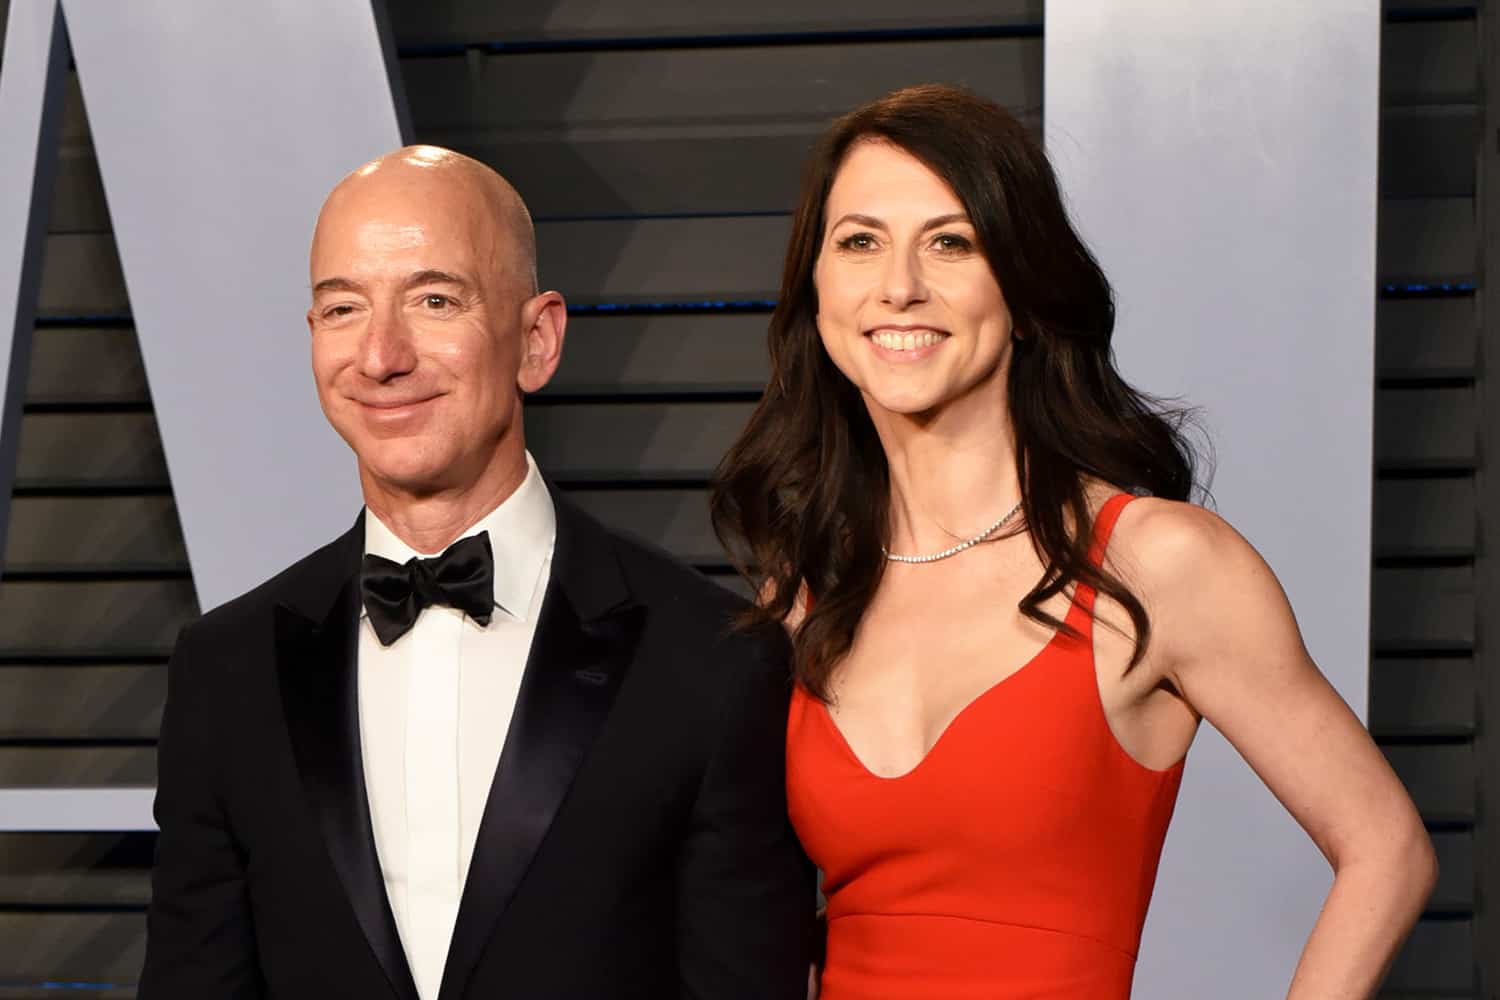 Jeff Bezos to Divorce, Dior Reschedules Due to Protests